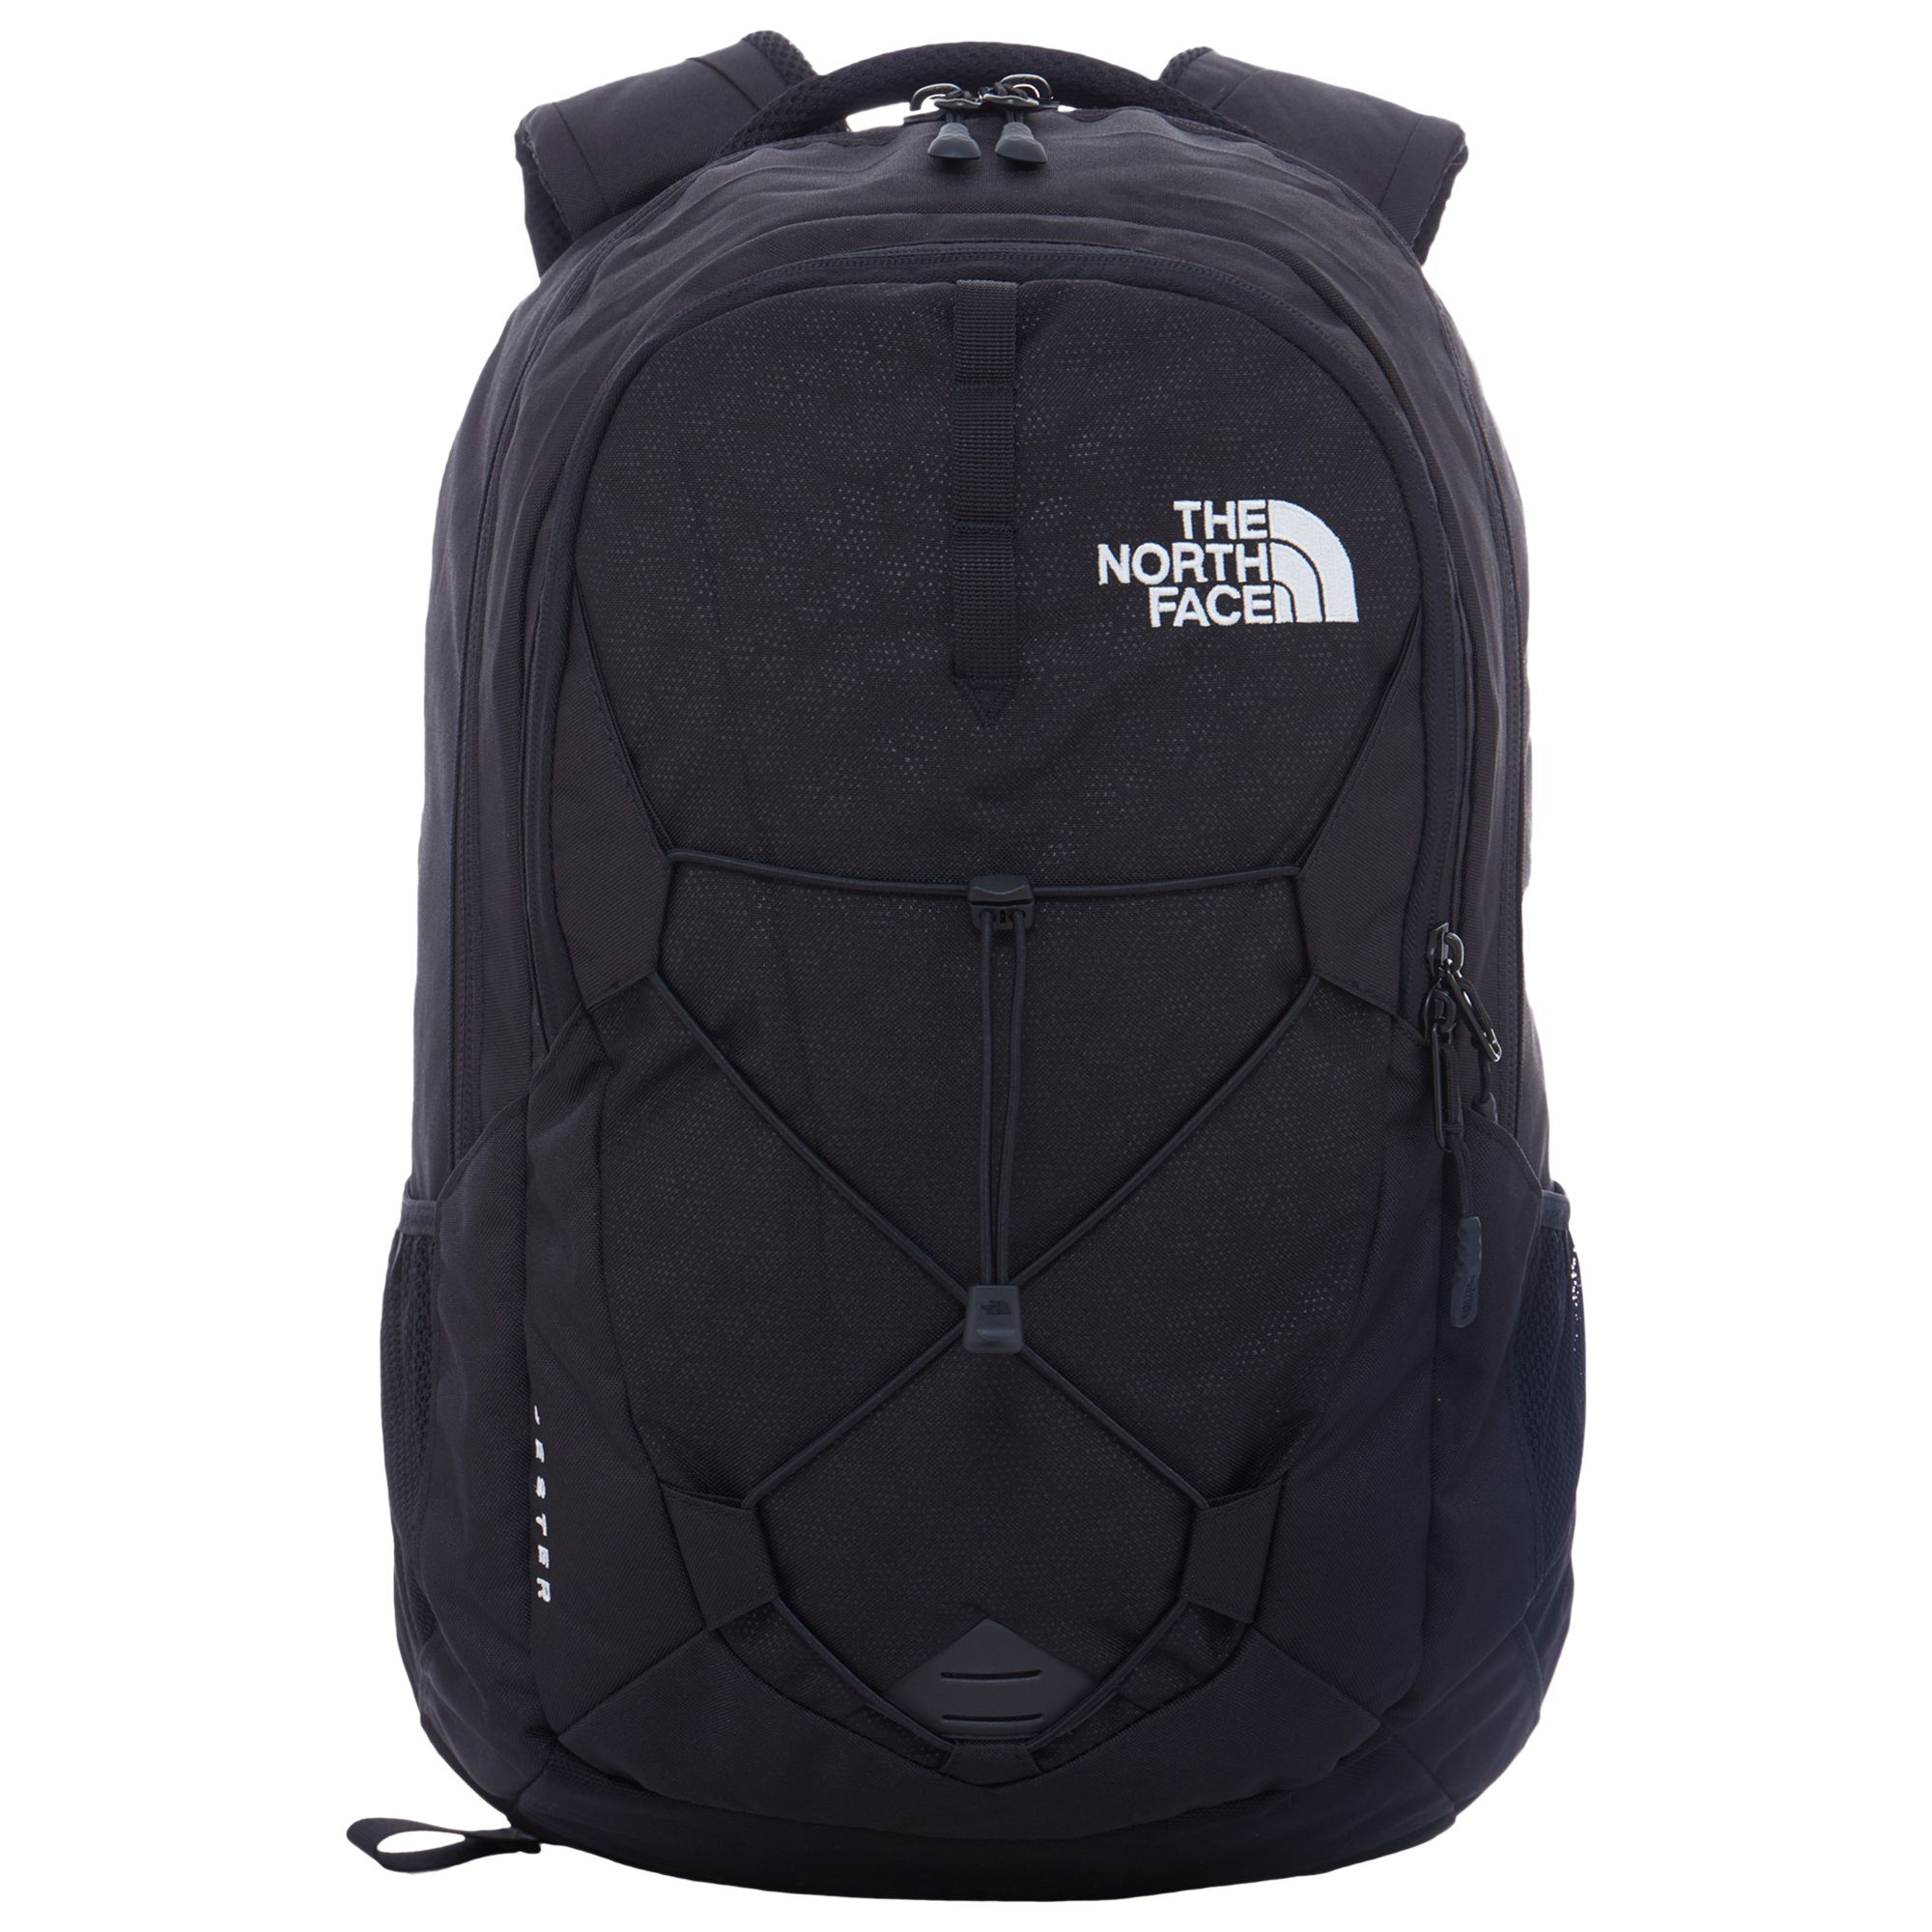 north face backpack dimensions